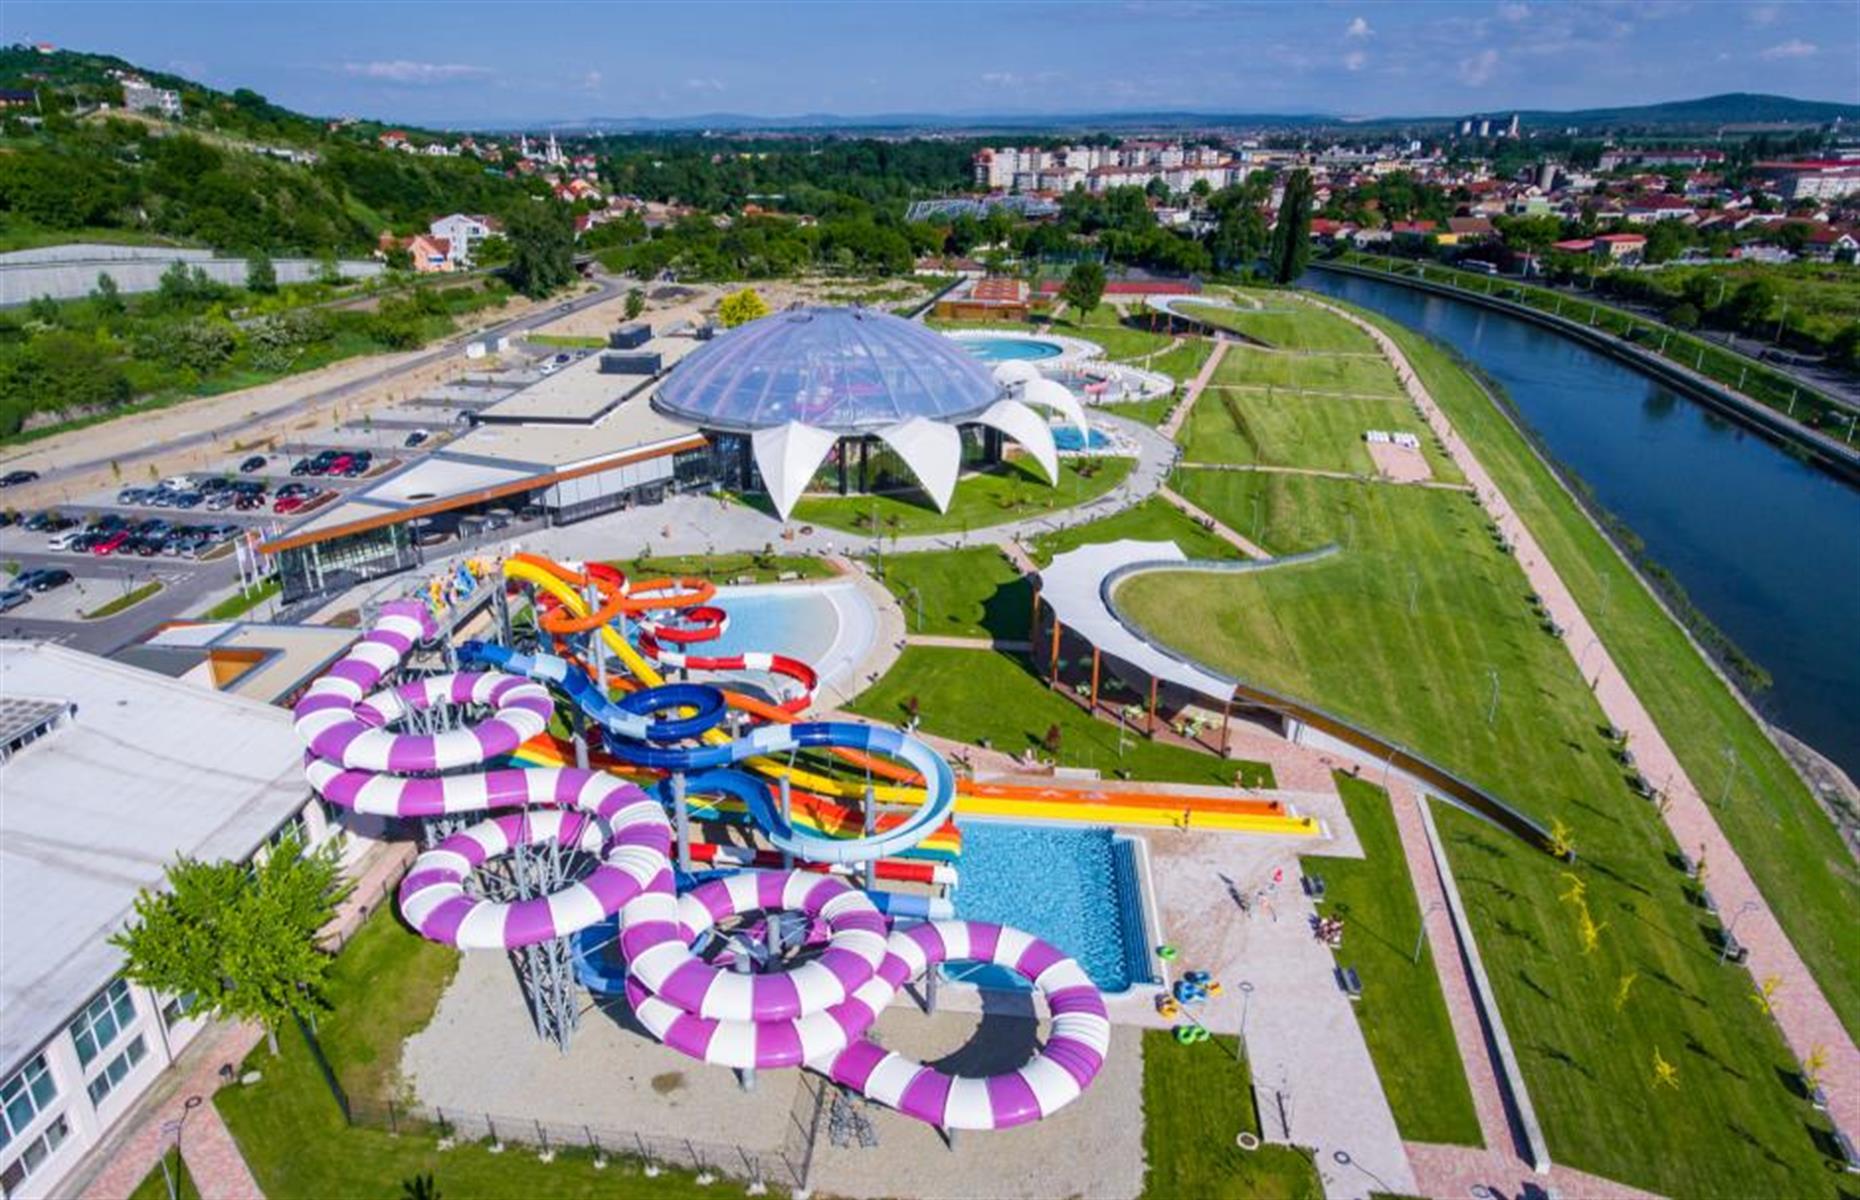 <p>Whether you're leaping about in the wave pool, doing lengths in the Olympic-sized pool, whizzing down slides or walking the plank on the pirate ship, <a href="https://aquapark-nymphaea.ro/?jjj=1652259828164">Romania's favourite water parks</a> is sure to delight all the family. Parents can take it in turns to relax in the spa which has a Turkish bath, a range of geothermal water pools, steam room, sauna and cold room.</p>